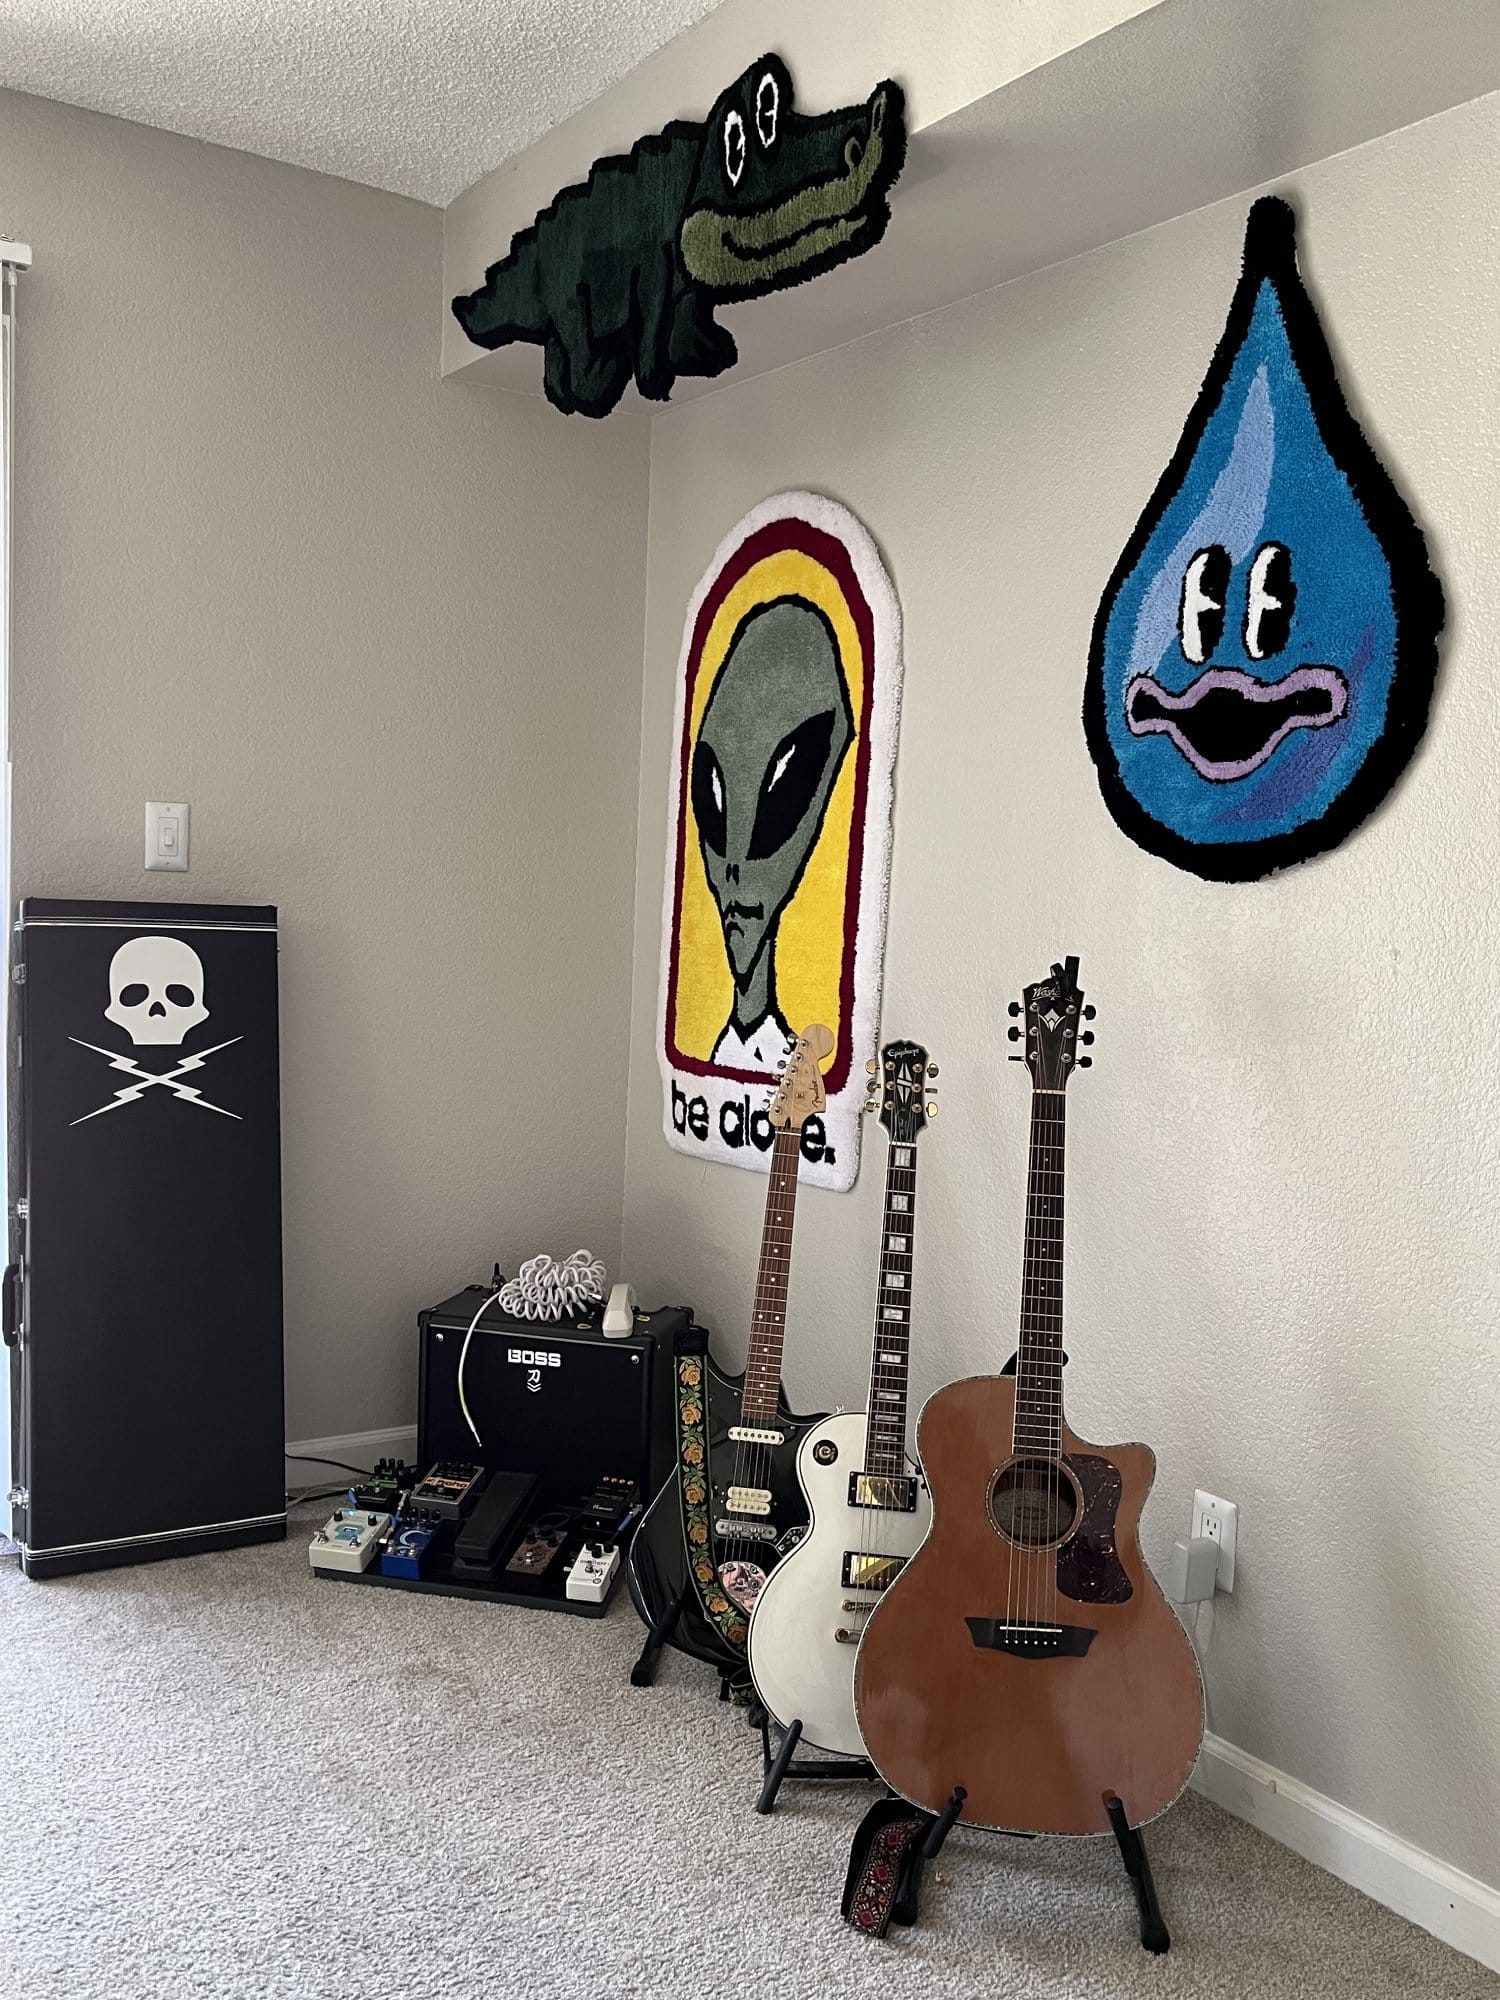 A music-themed corner with three guitars next to a BOSS amplifier, a pedalboard, and a storage case, under wall hanging rugs in the shapes of a crocodile, an alien, and a water drop